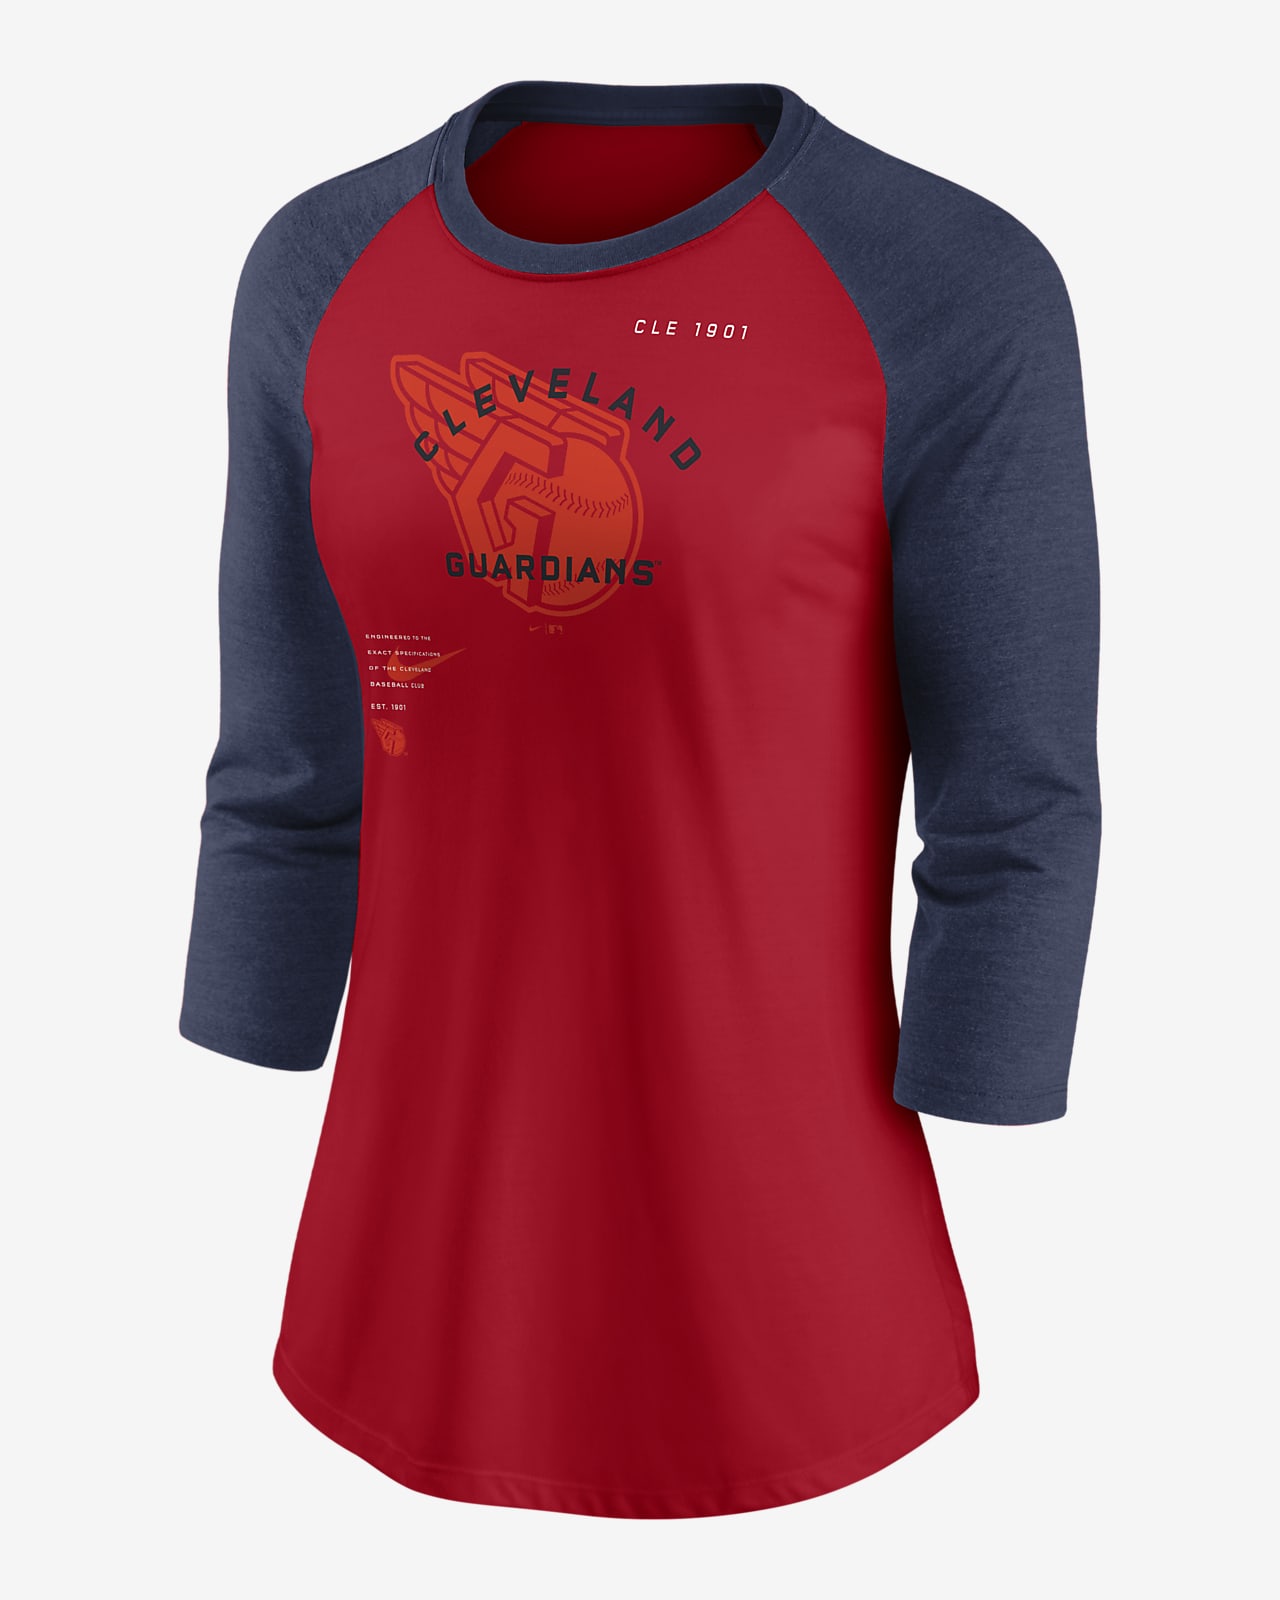 Nike Next Up (MLB Cleveland Guardians) Women's 3/4-Sleeve Top